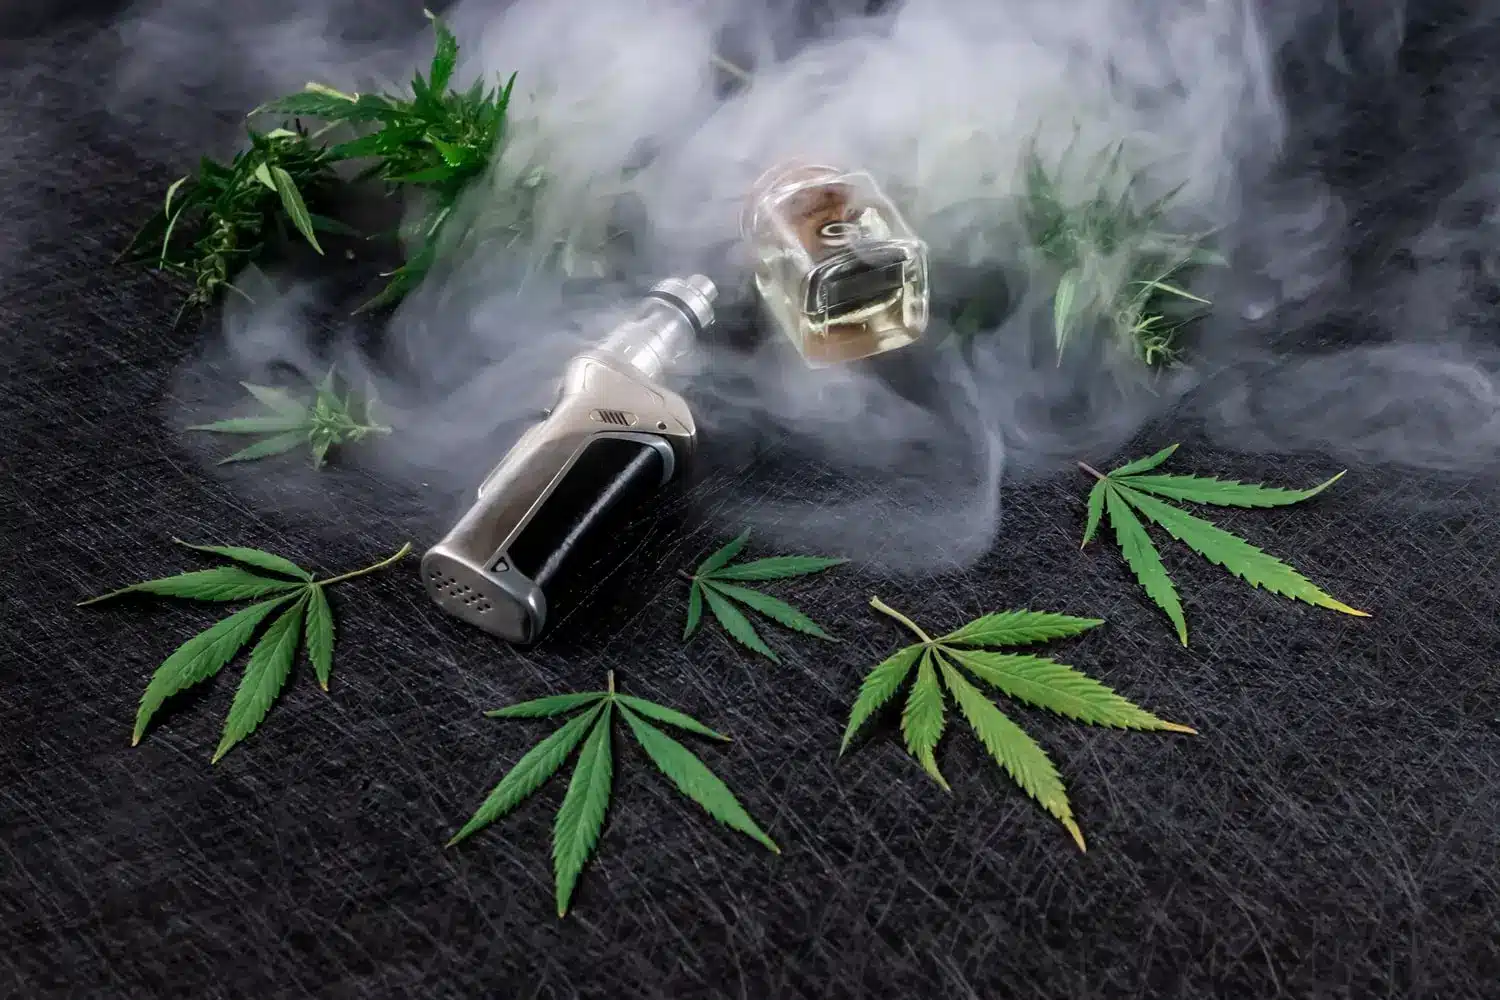 The Beginners’ Guide to Cannabis Vaping